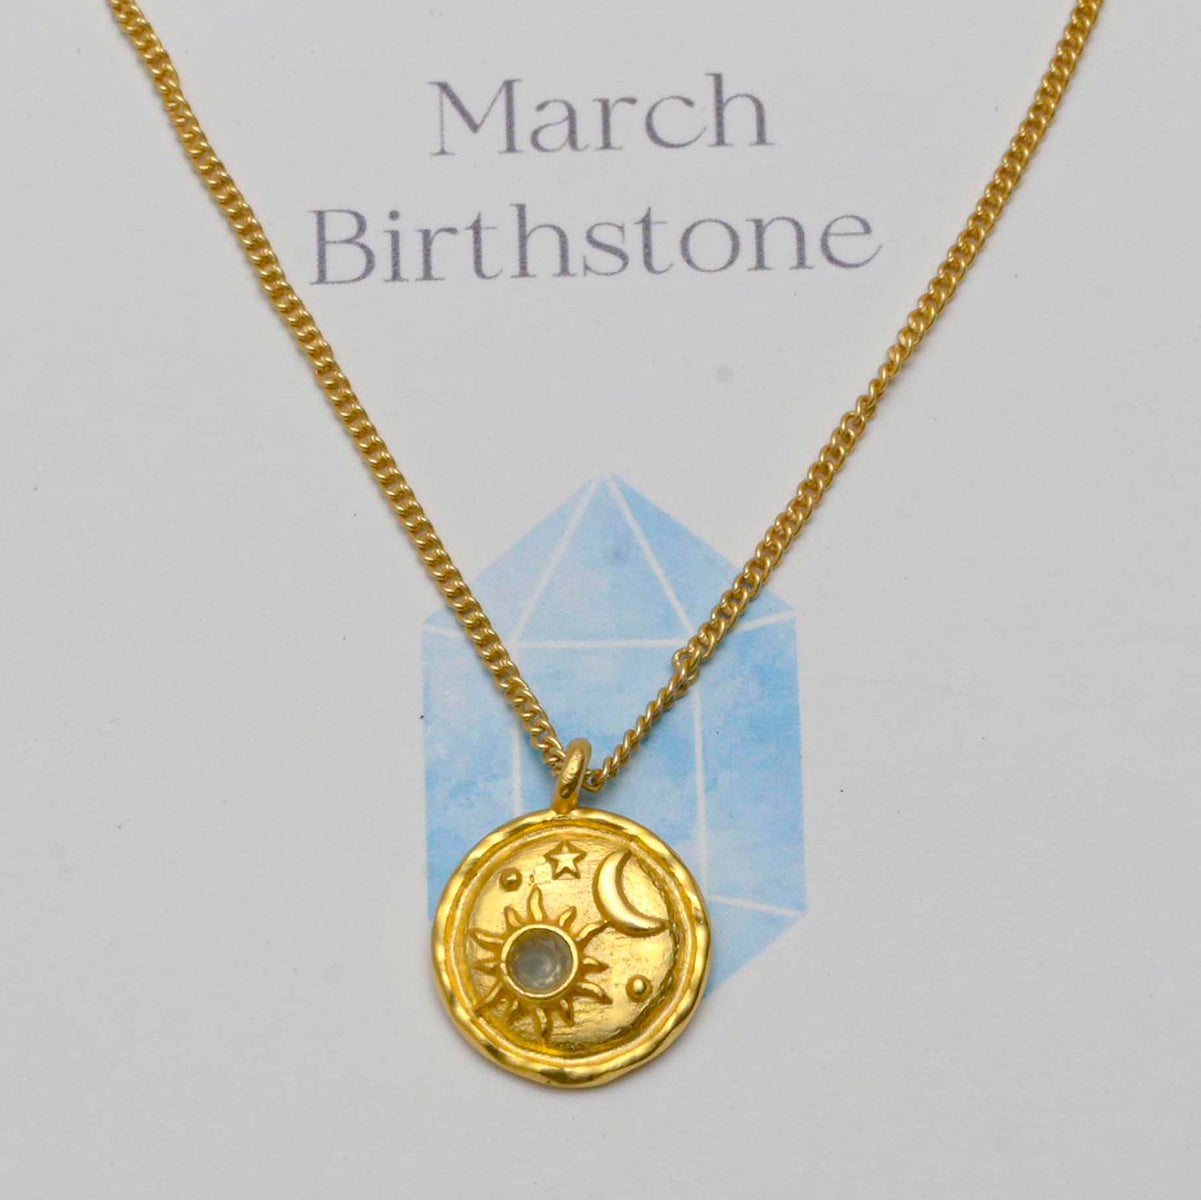 March Birthstone Necklace With Blue Chalcedony